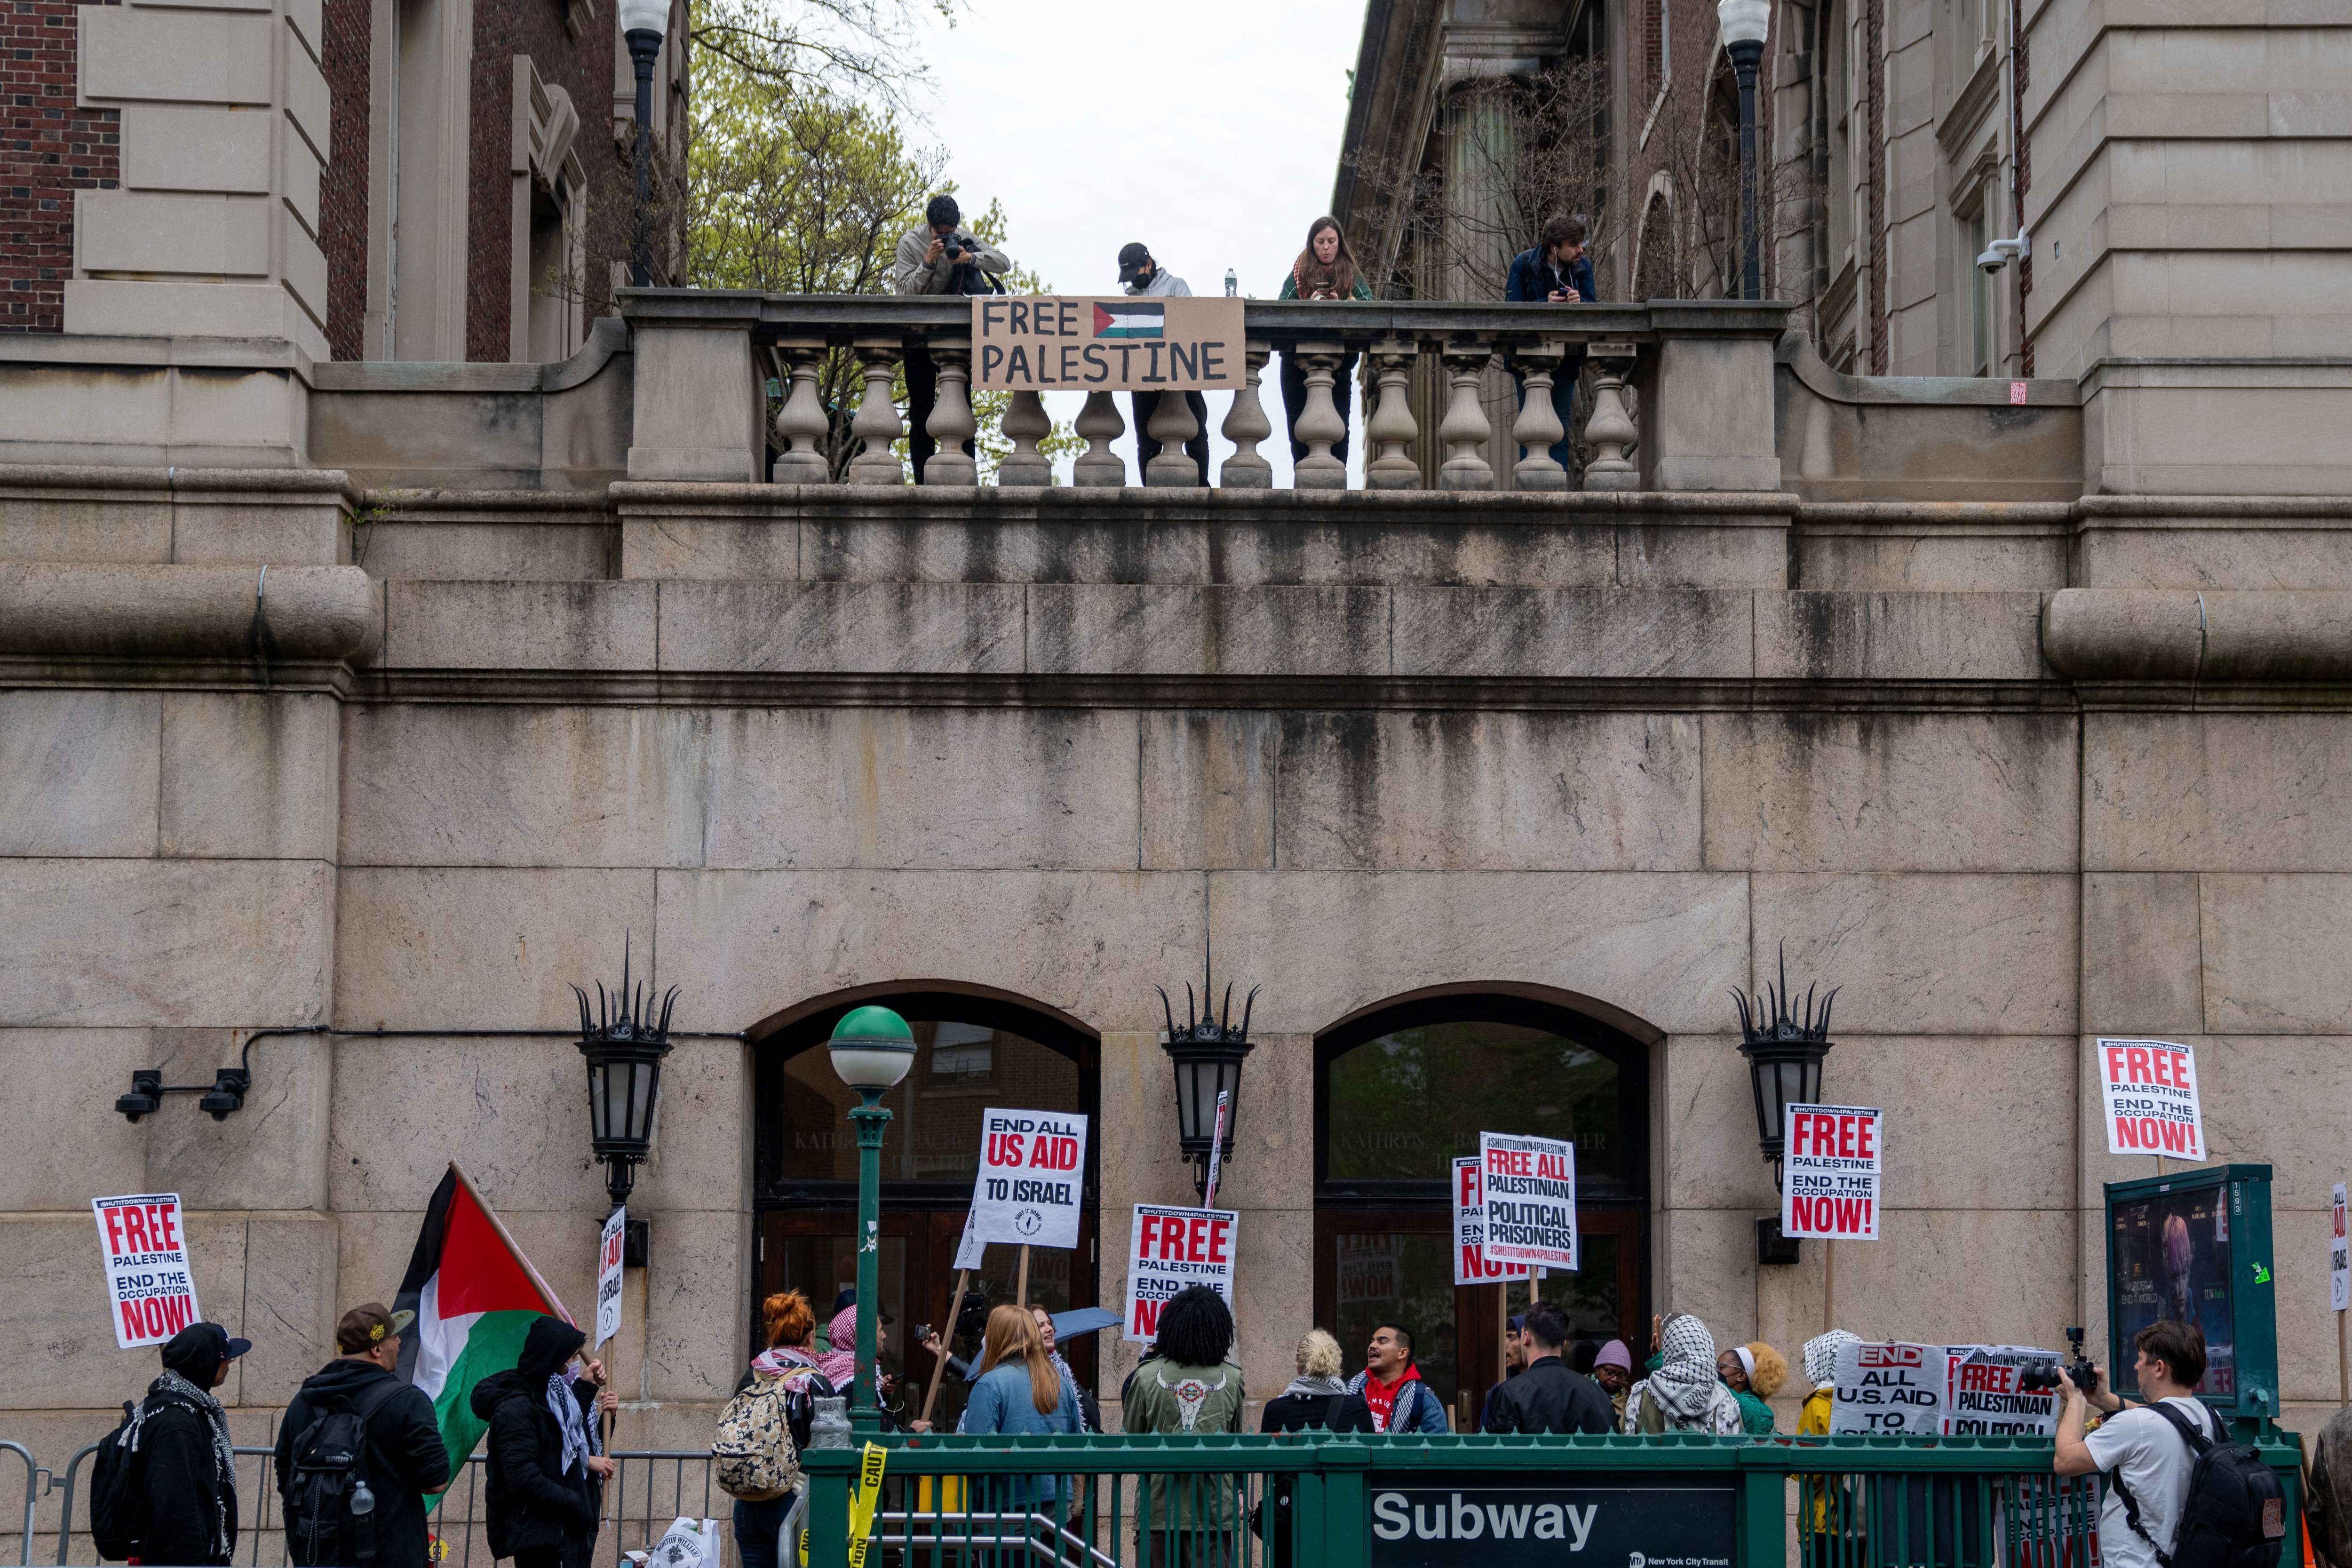 Protesters show support for Palestinians in Gaza, at Columbia University in New York City